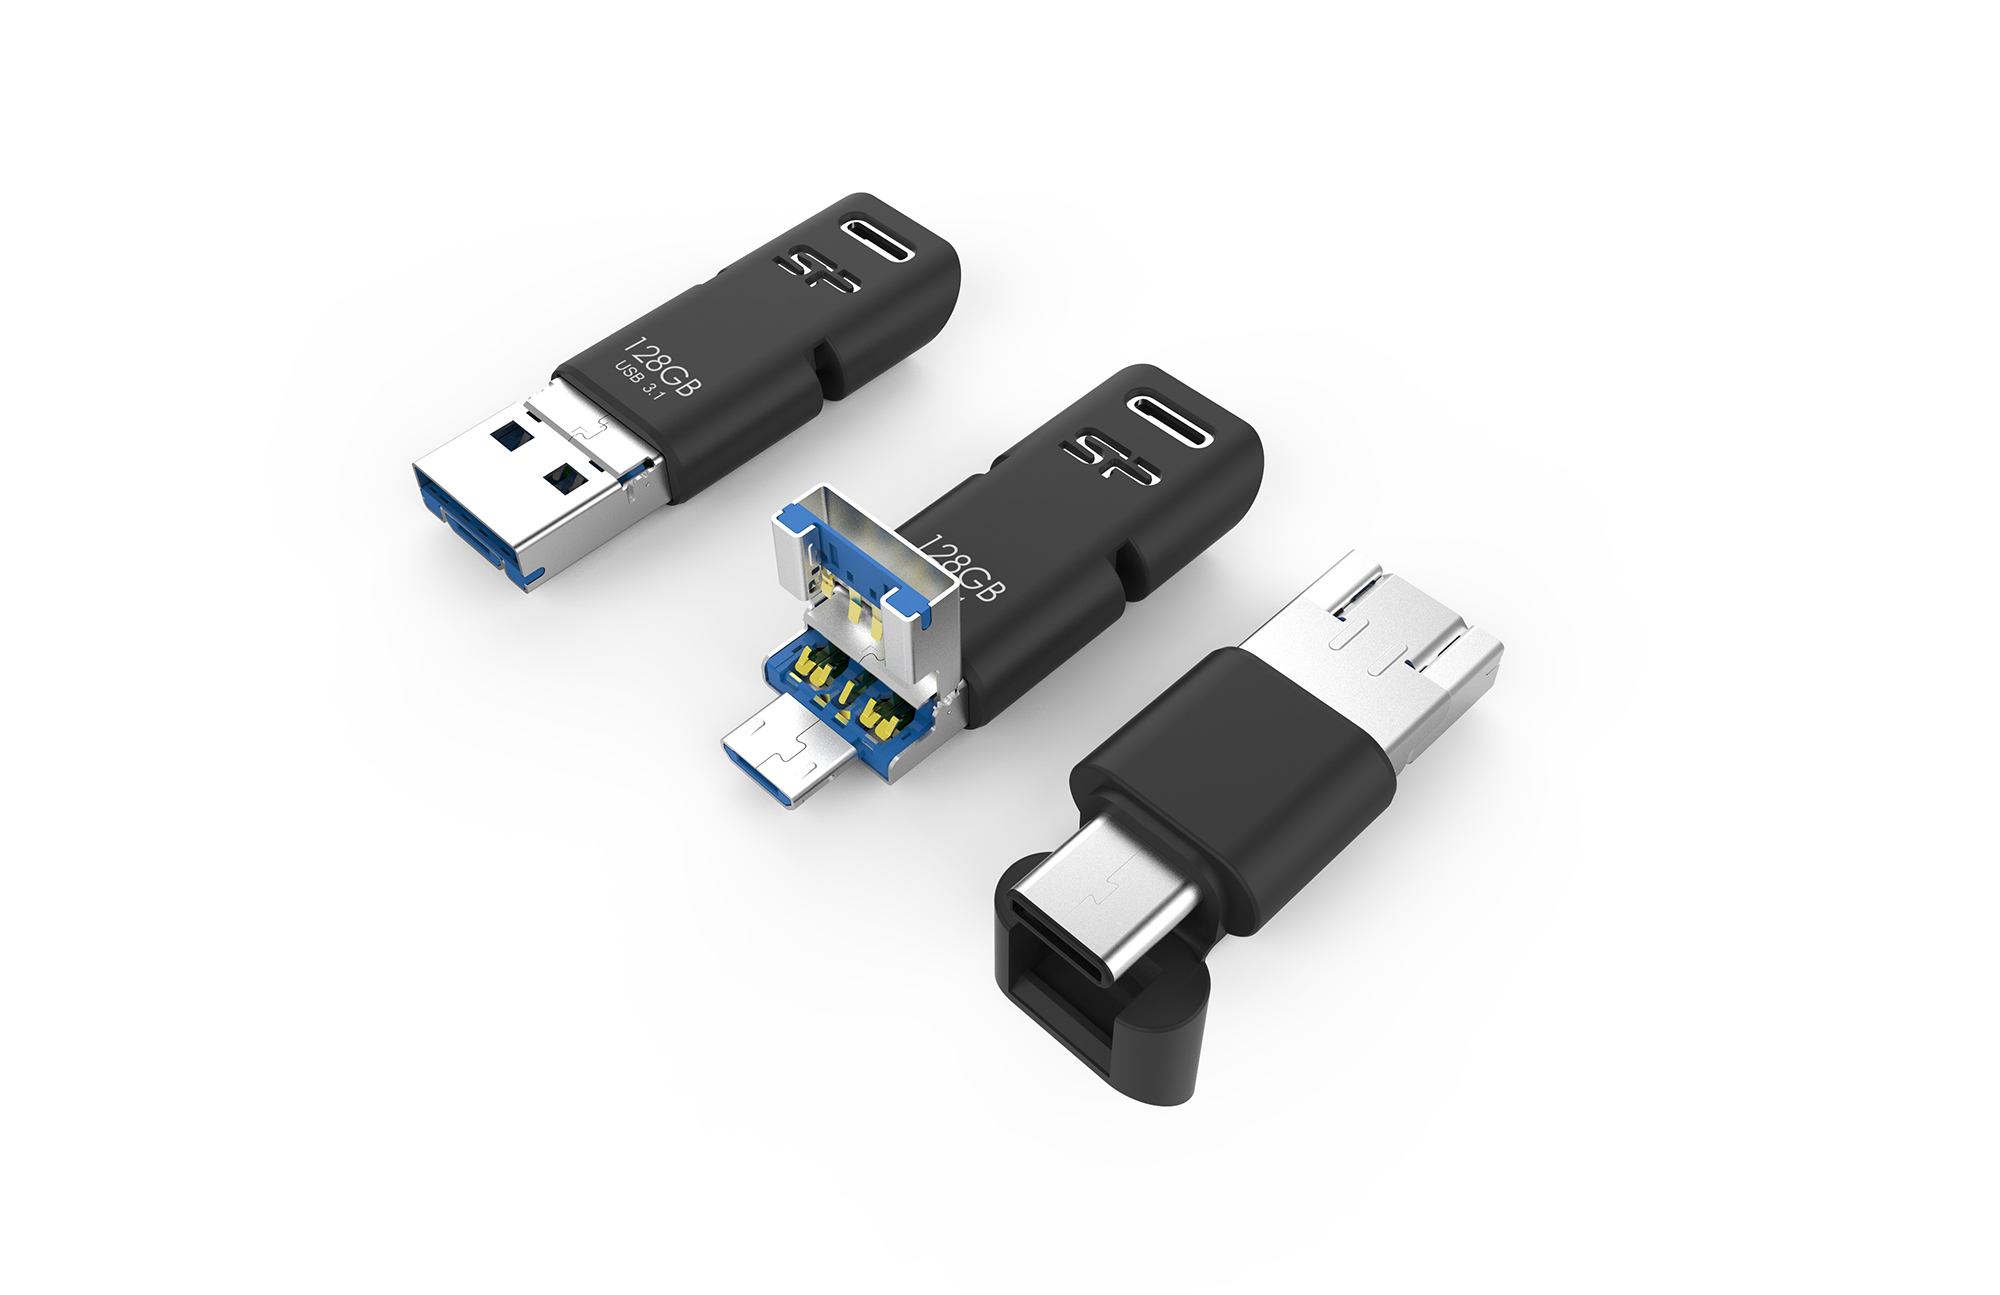 3in1 Mobile OTG USB Flash Drive / Silicon Power Computer & Communications Inc.